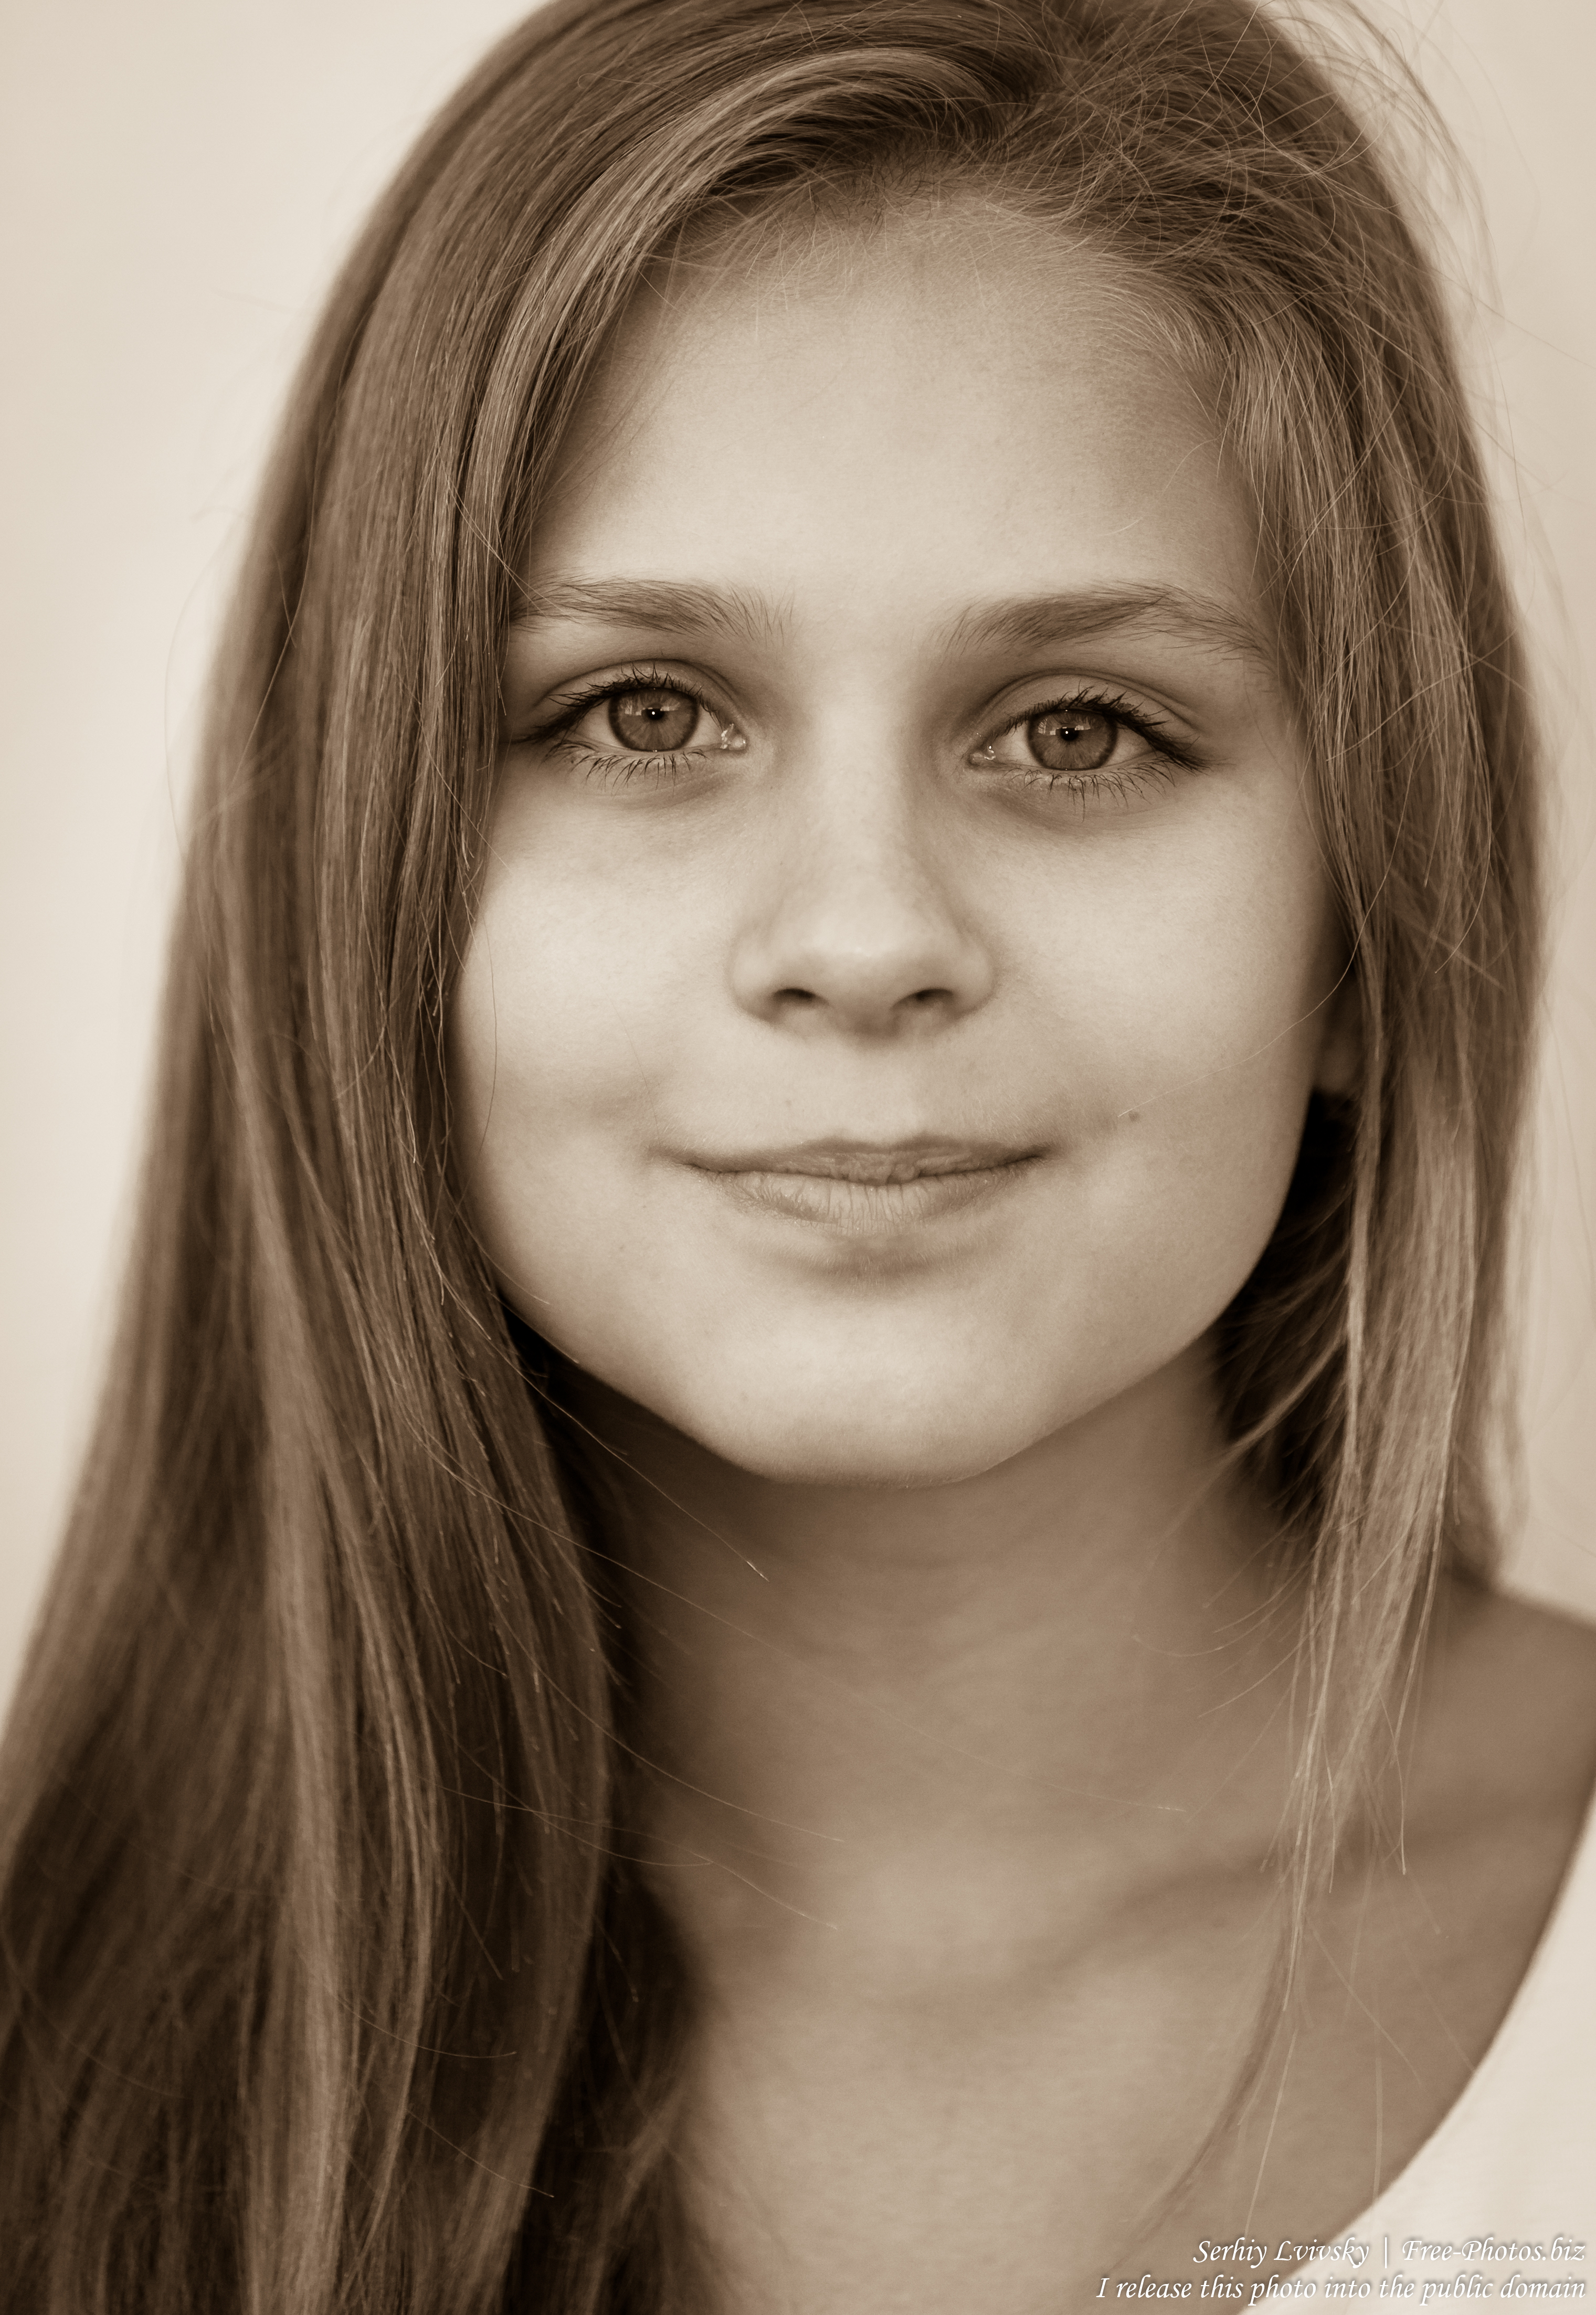 a 12-year-old blond girl wearing a white dress photographed in July 2015 by Serhiy Lvivsky, picture 8